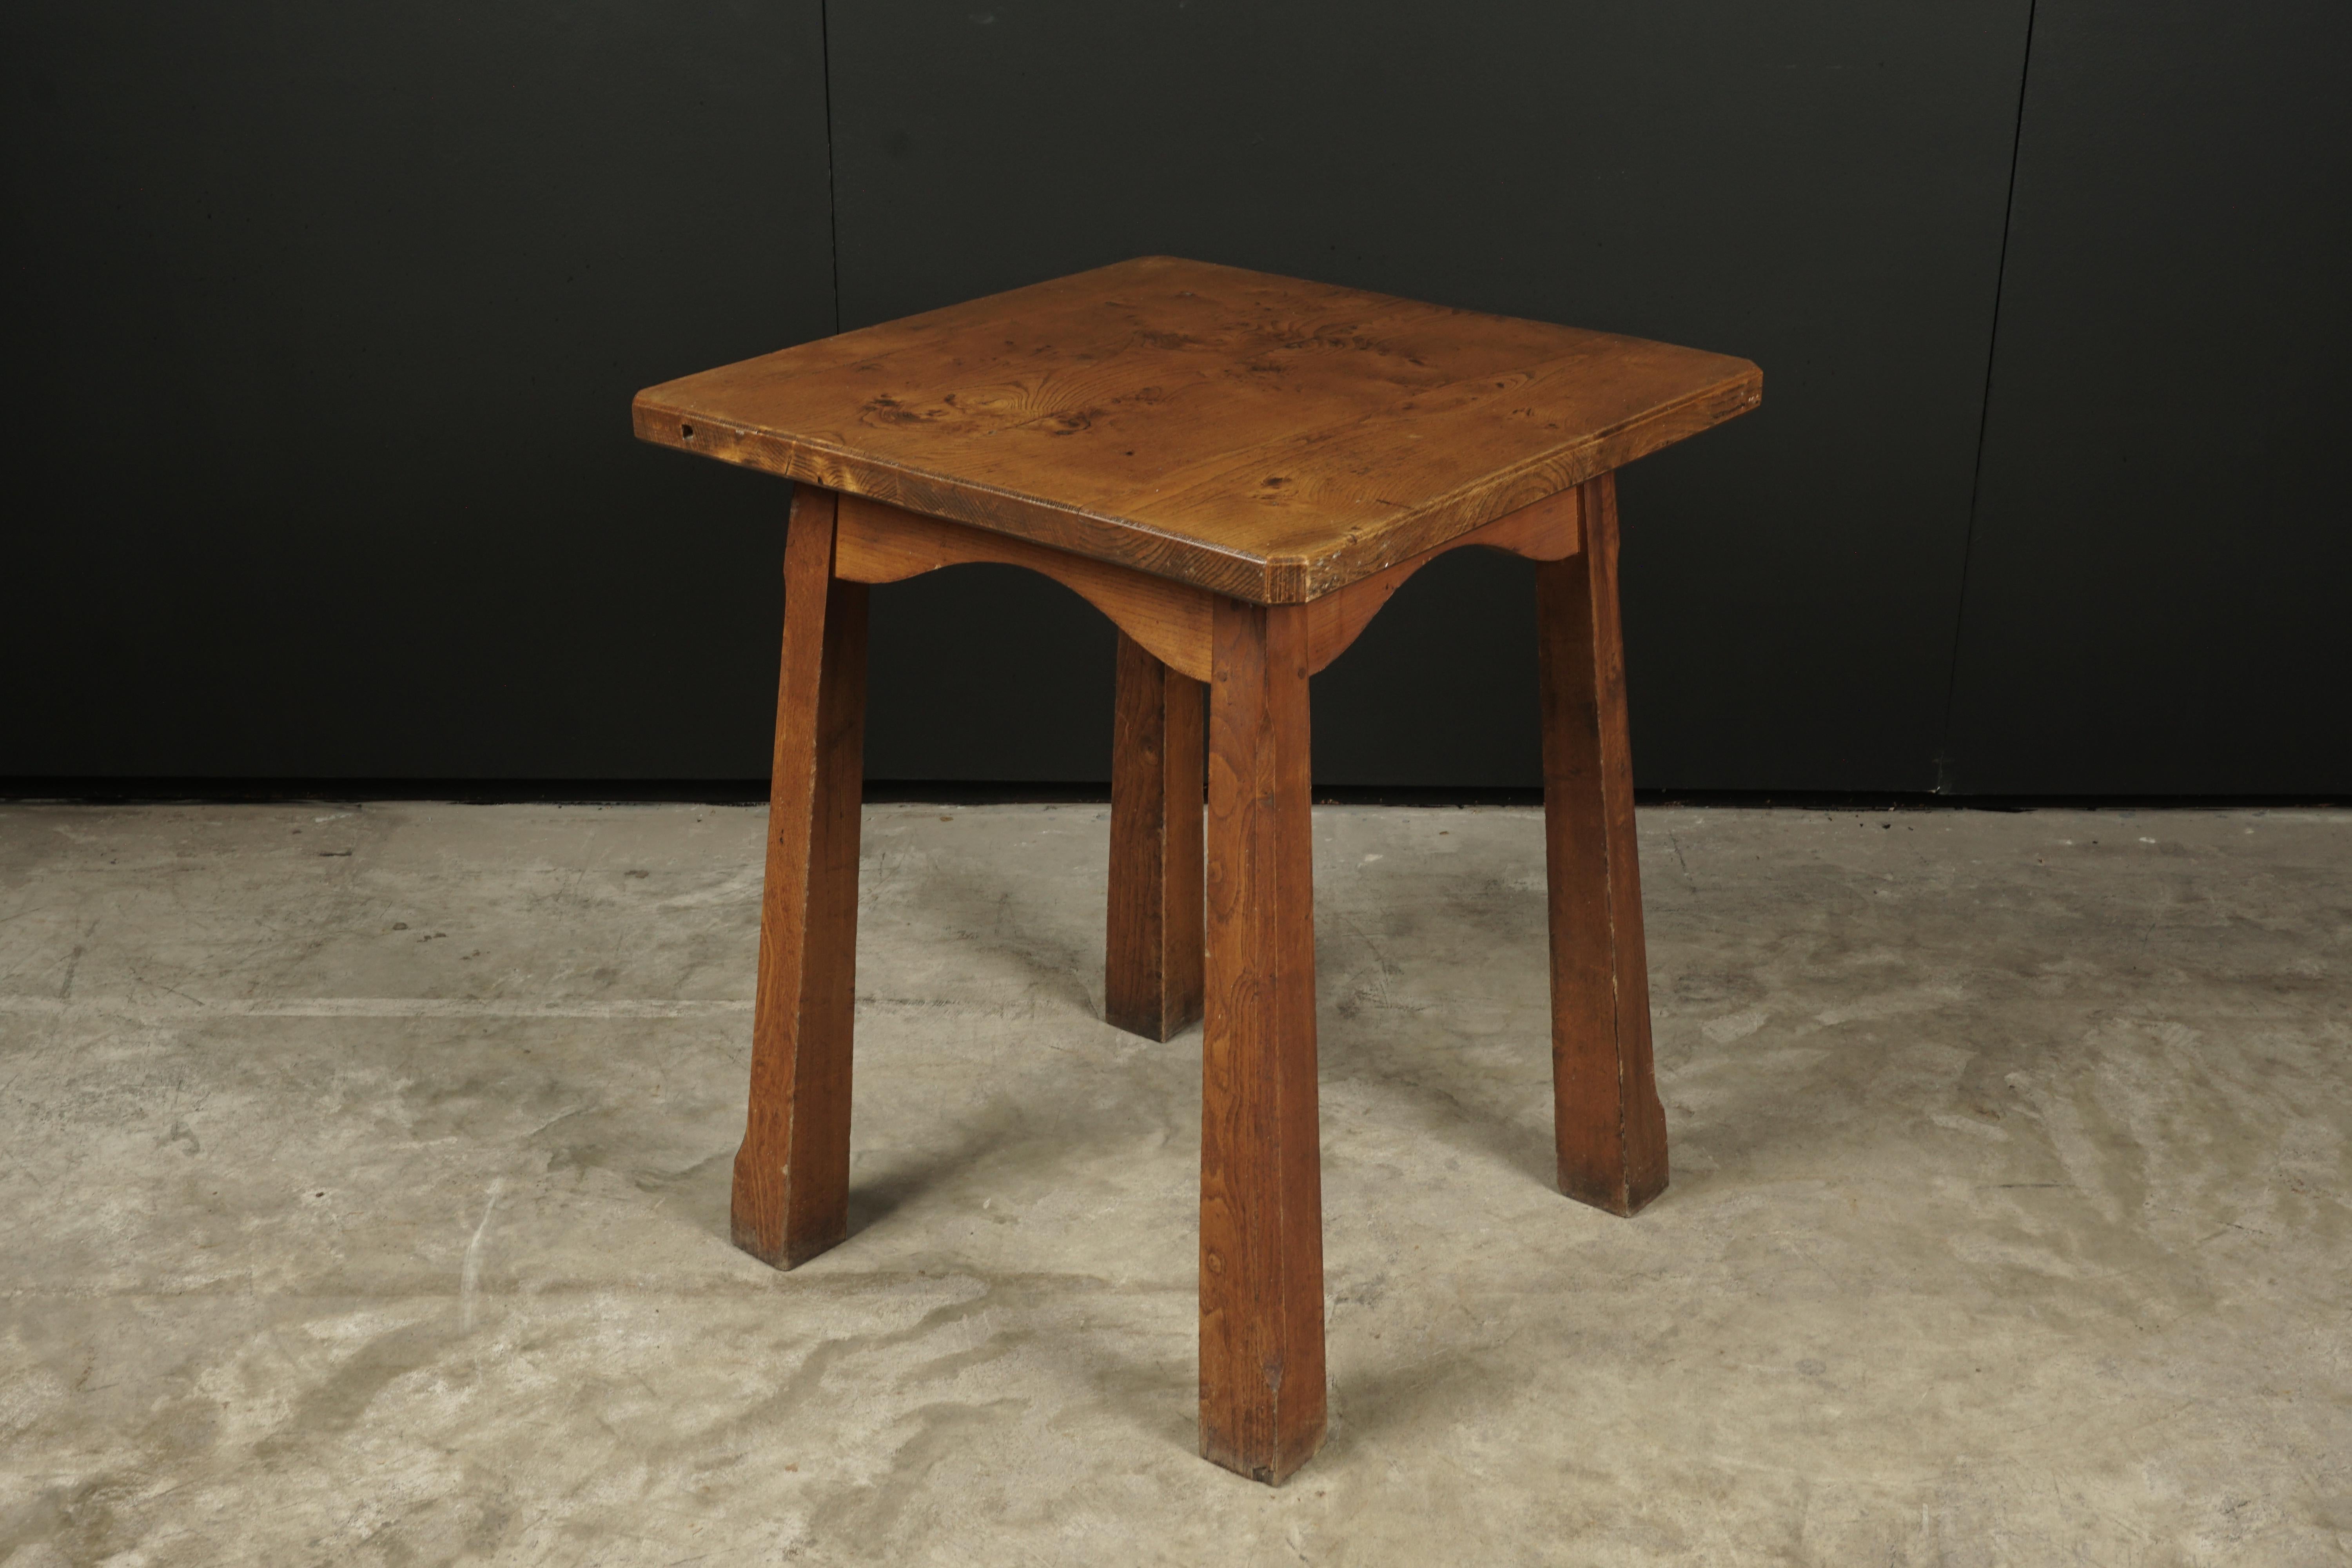 European Vintage Pine Reconstruction Table from France, circa 1950